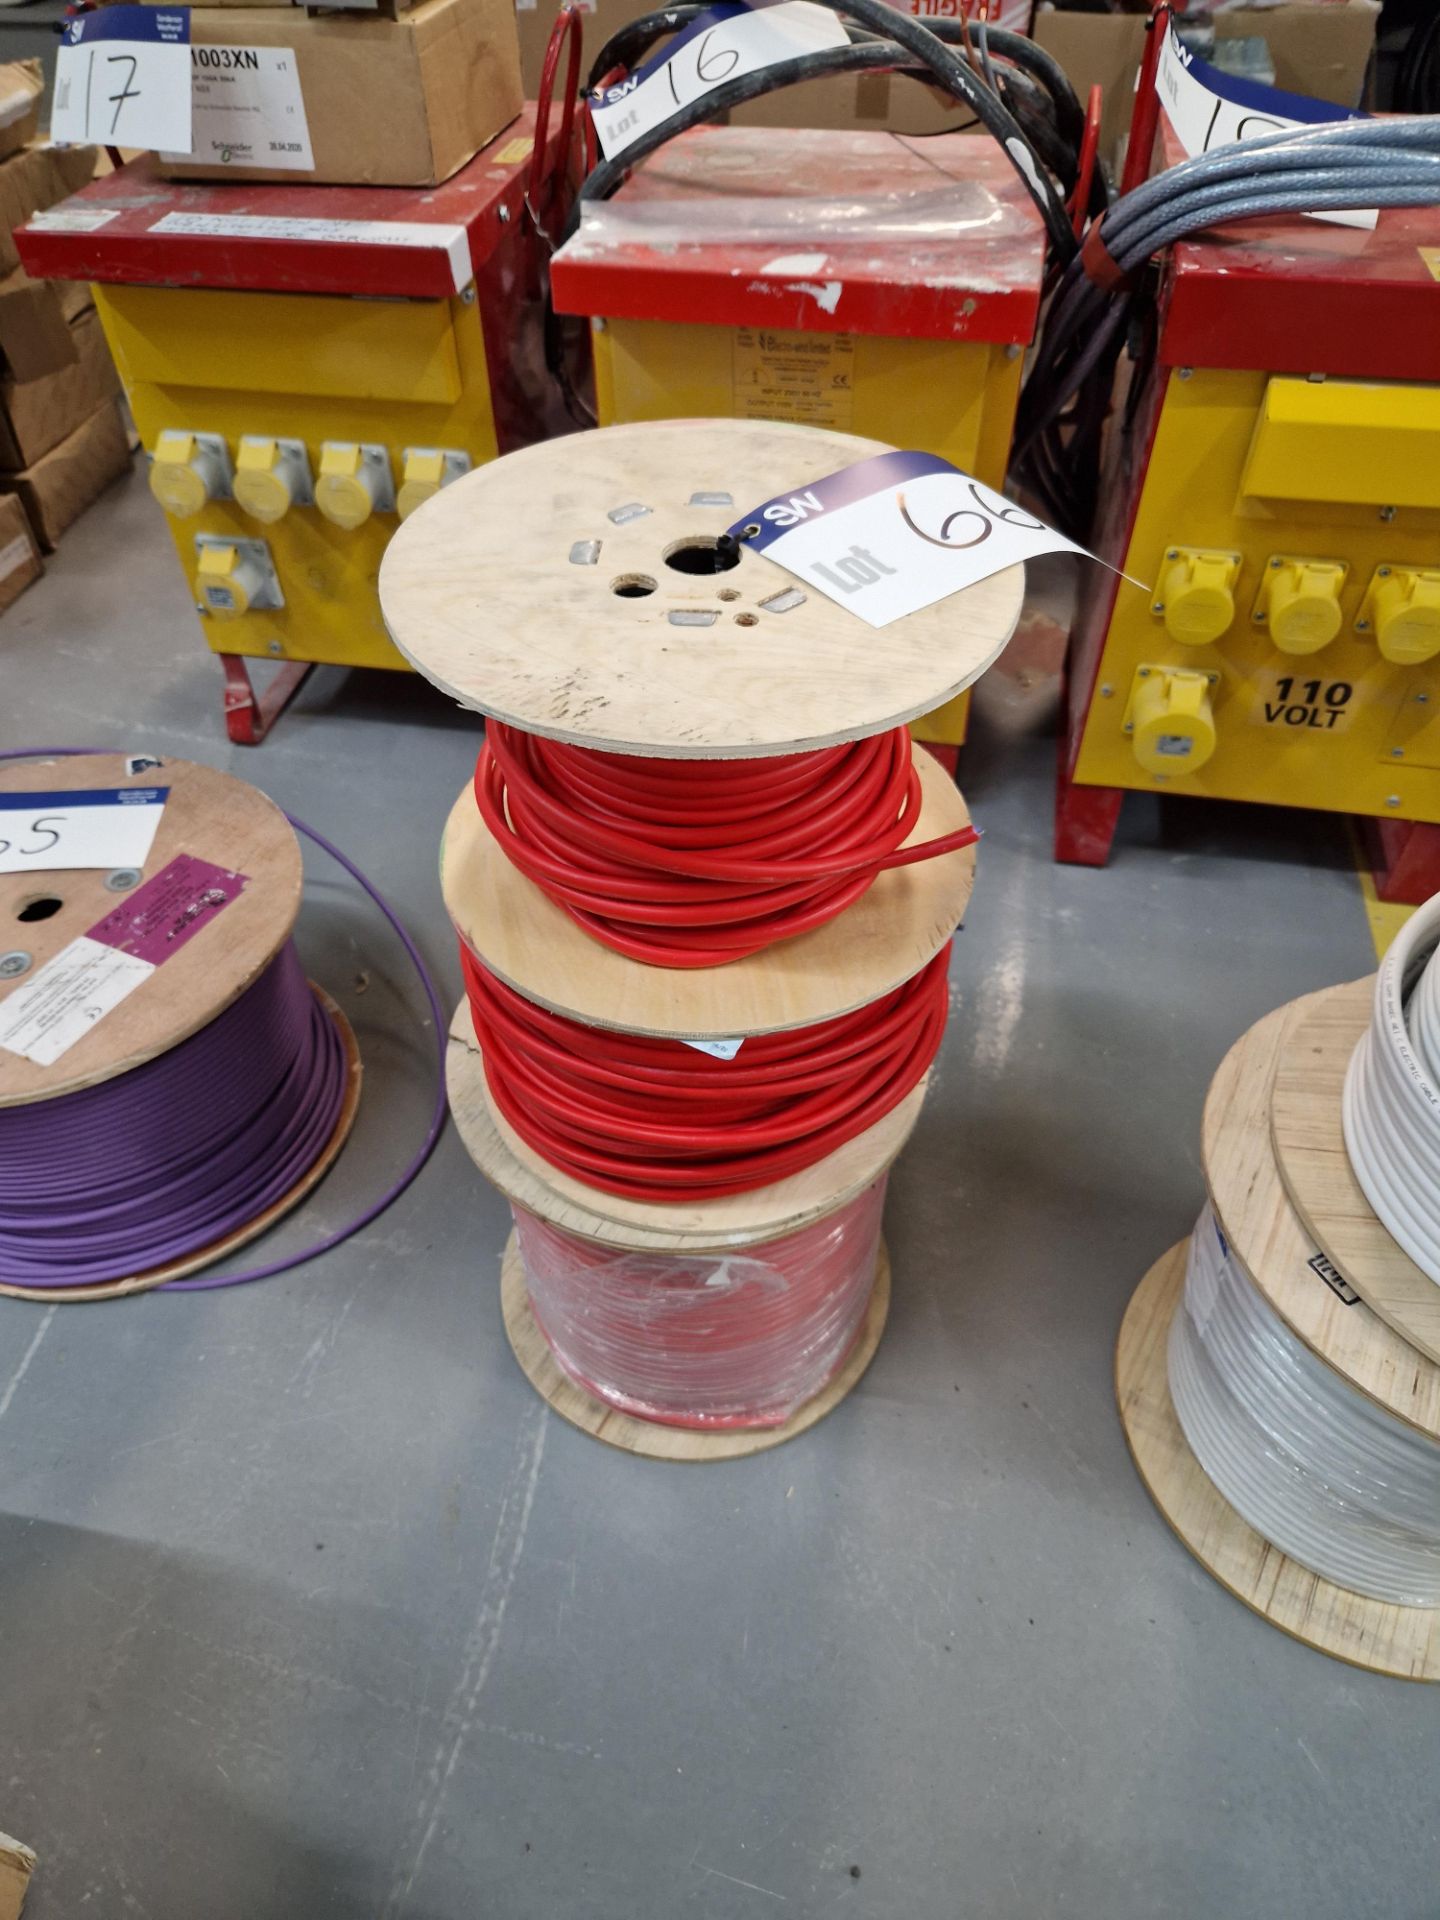 Three Rolls of IDH Cables Kilflam Standard 2000 Electrical Cable Please read the following important